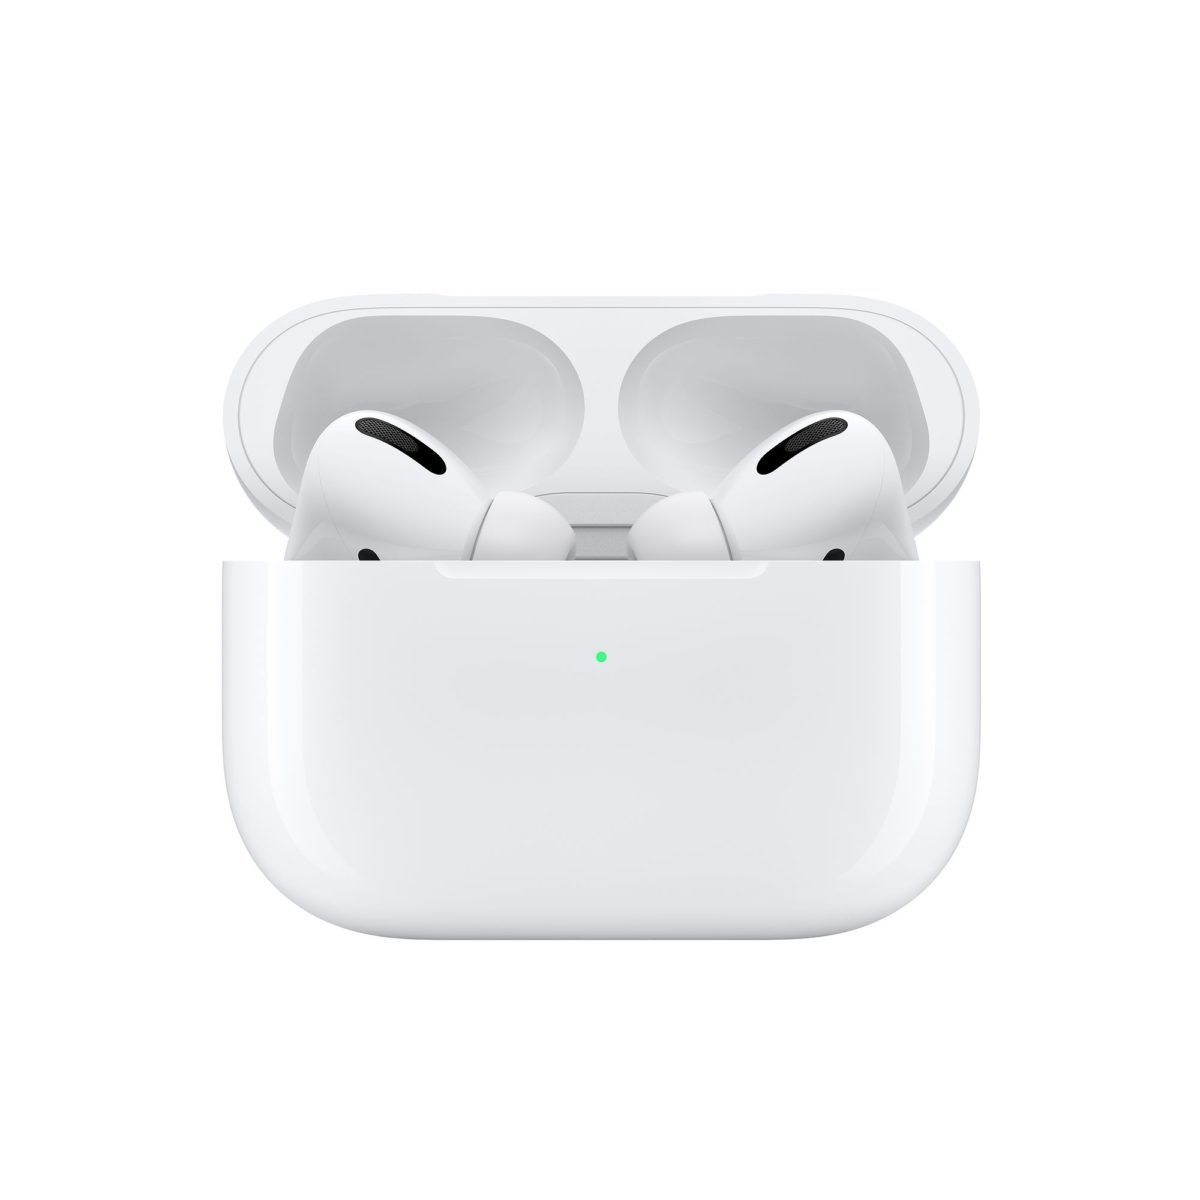 15 Tips for Using AirPods Pro - Geek Tech Online